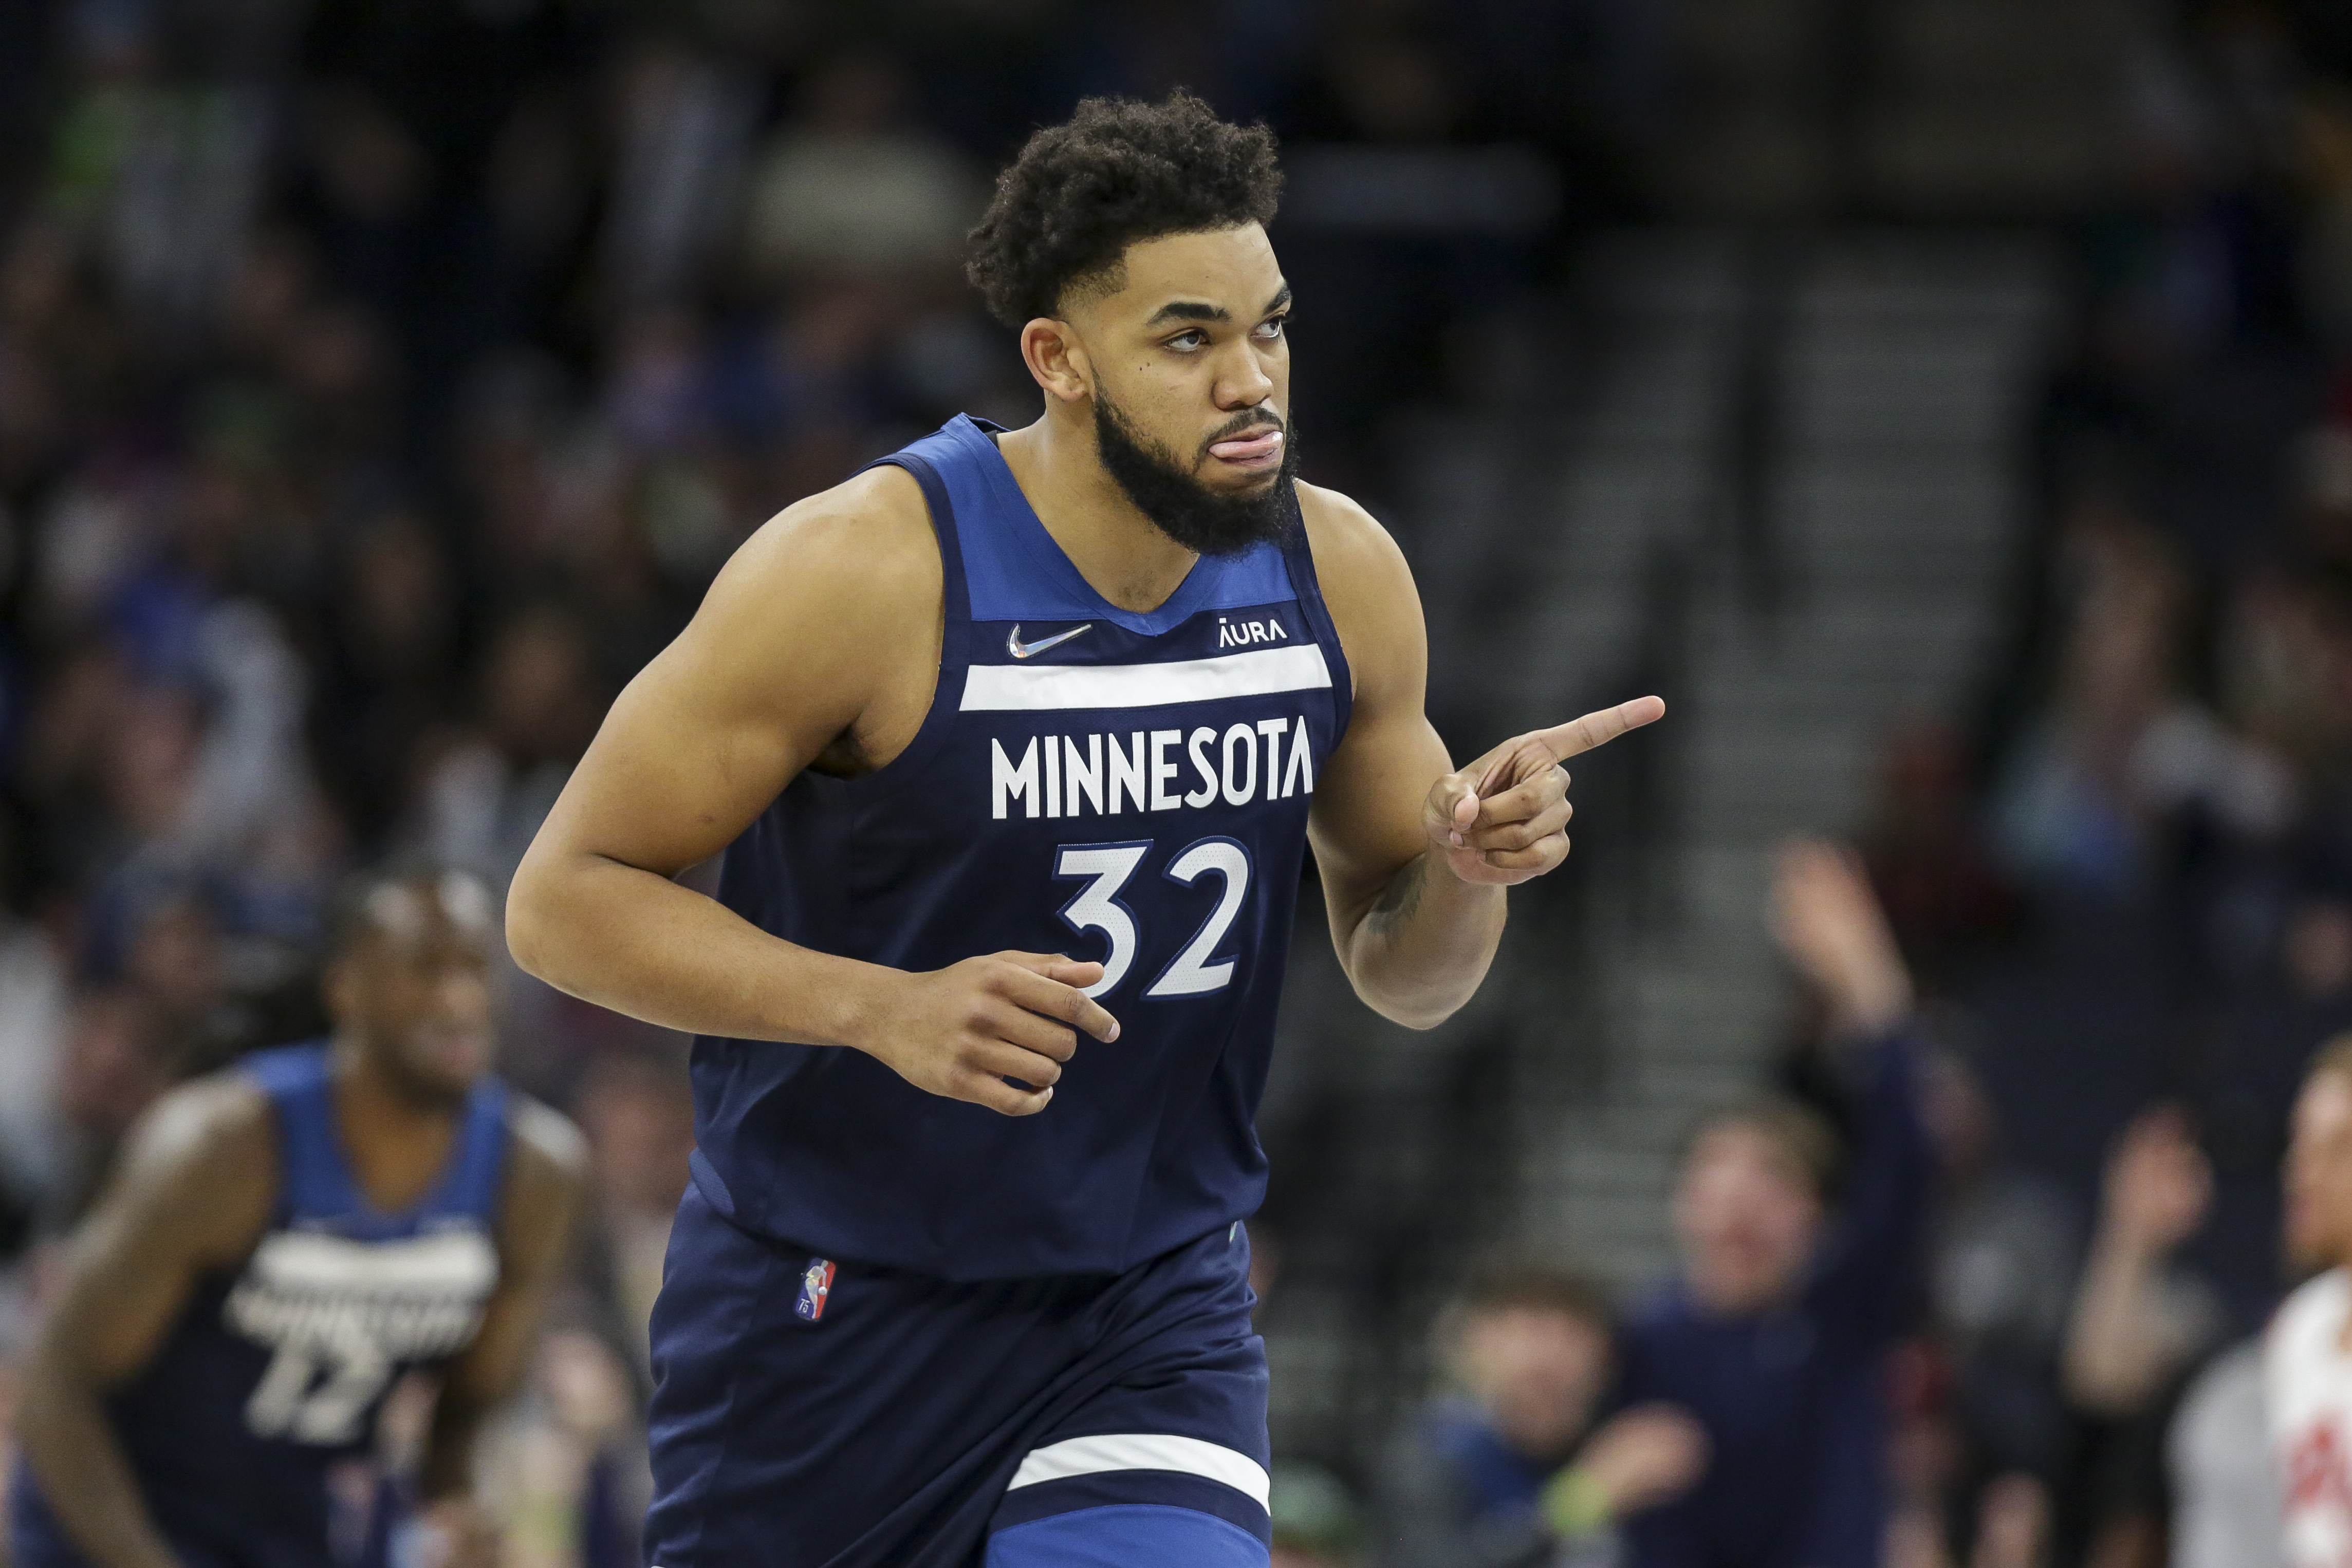 Karl-Anthony Towns Calls Out People for Not Getting Vaccinated